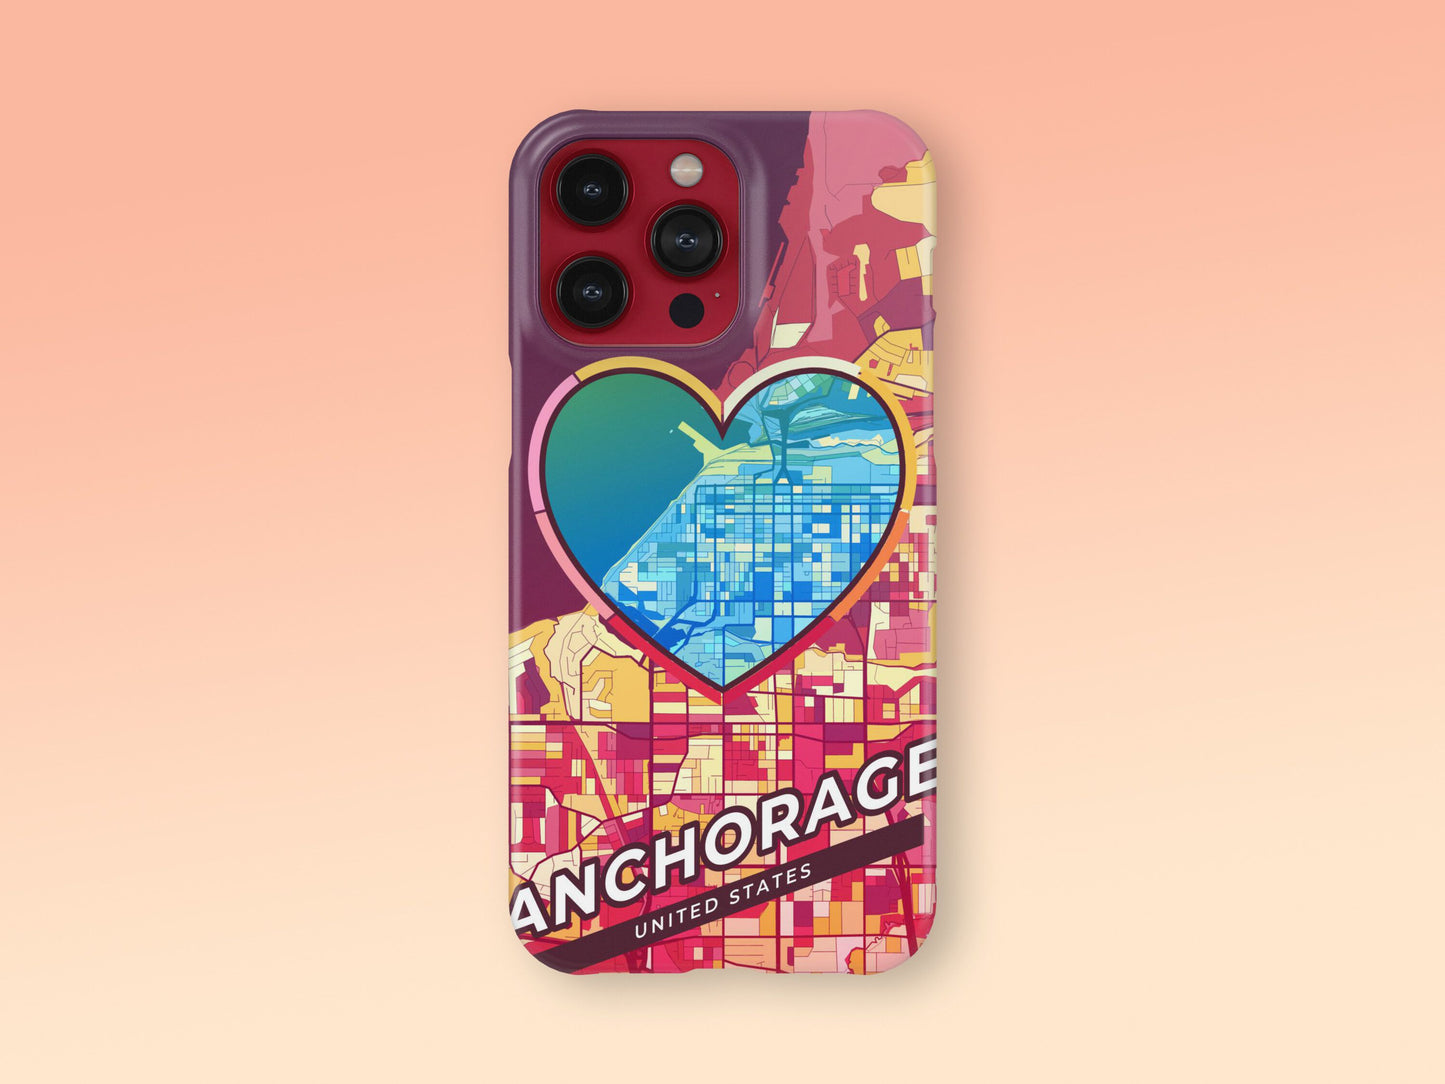 Anchorage Alaska slim phone case with colorful icon. Birthday, wedding or housewarming gift. Couple match cases. 2